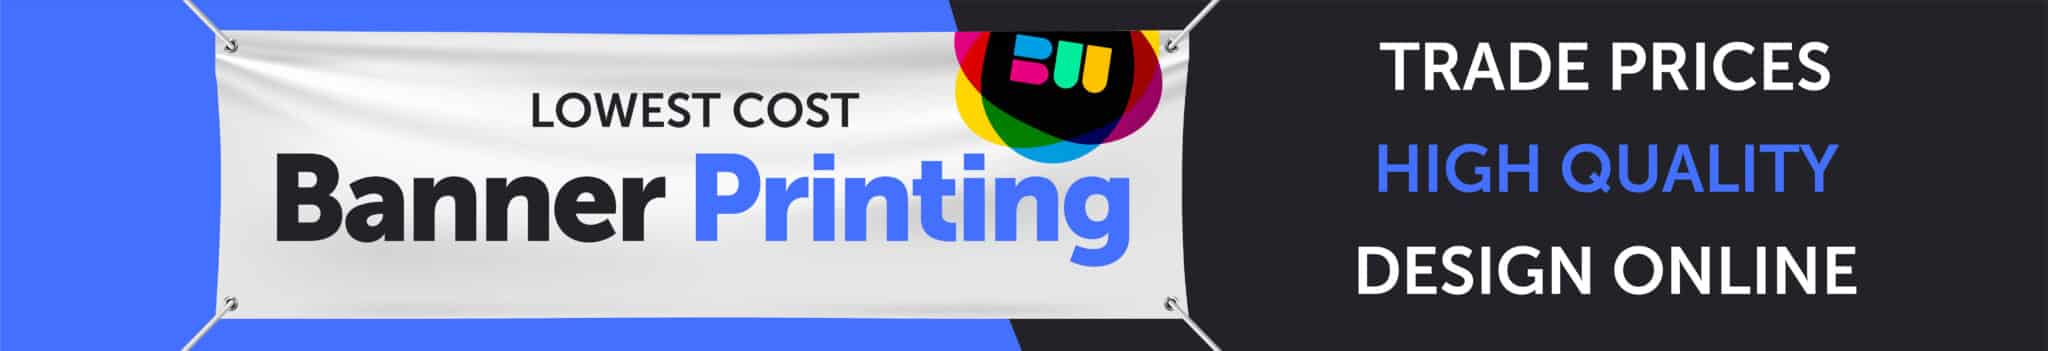 Banner Printing - Trade Prices, High Quality, Design Online